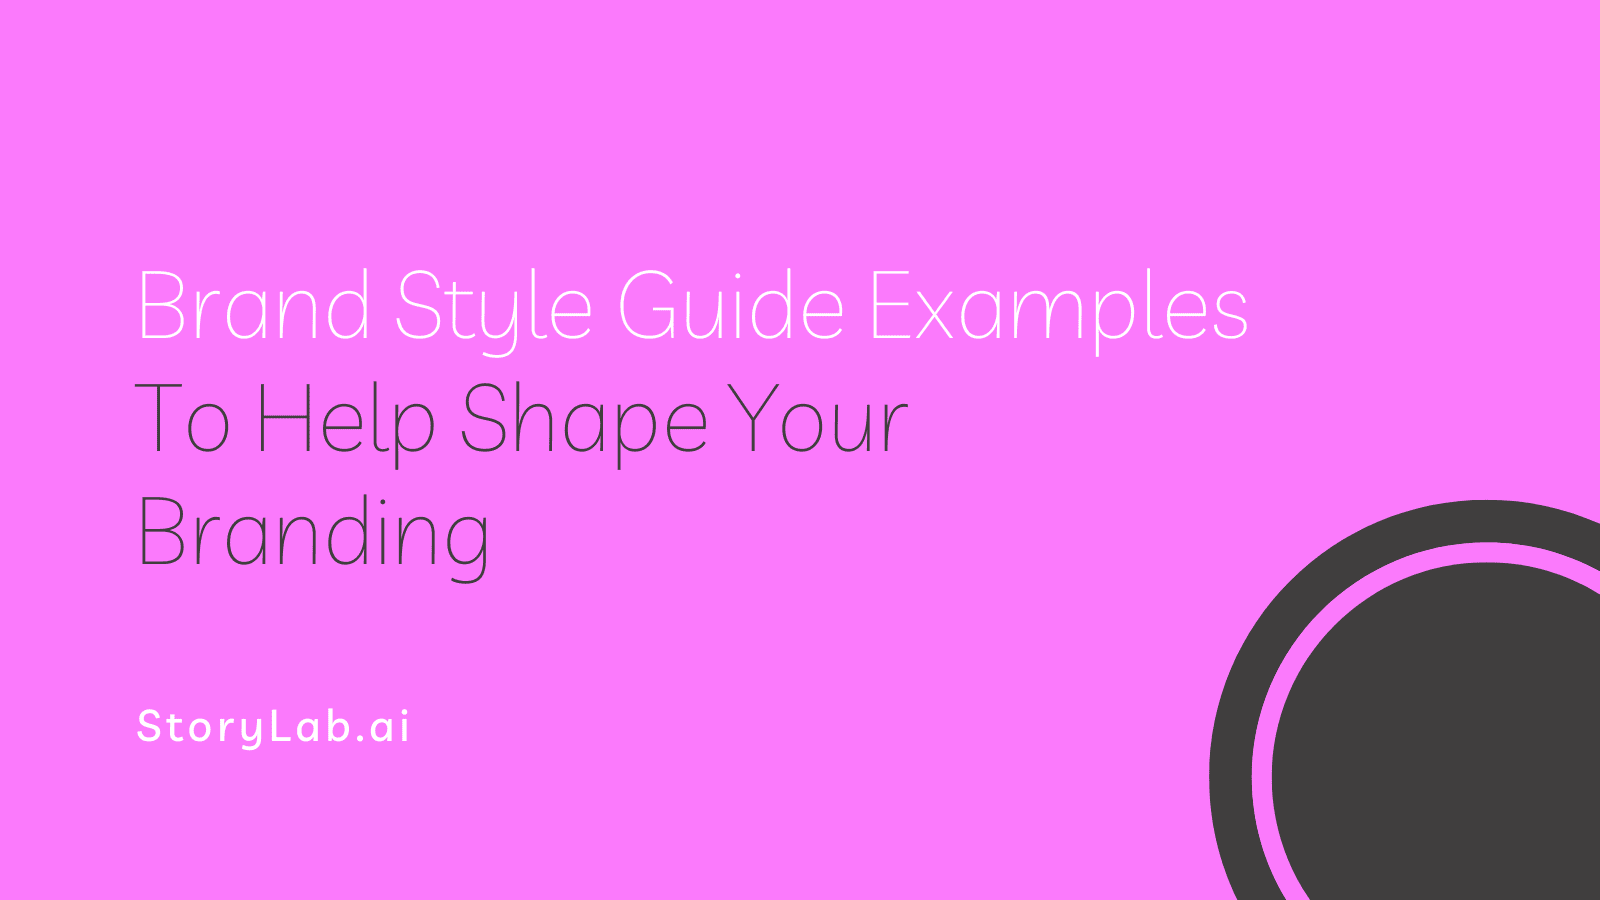 Brand Style Guide Examples To Help Shape Your Branding